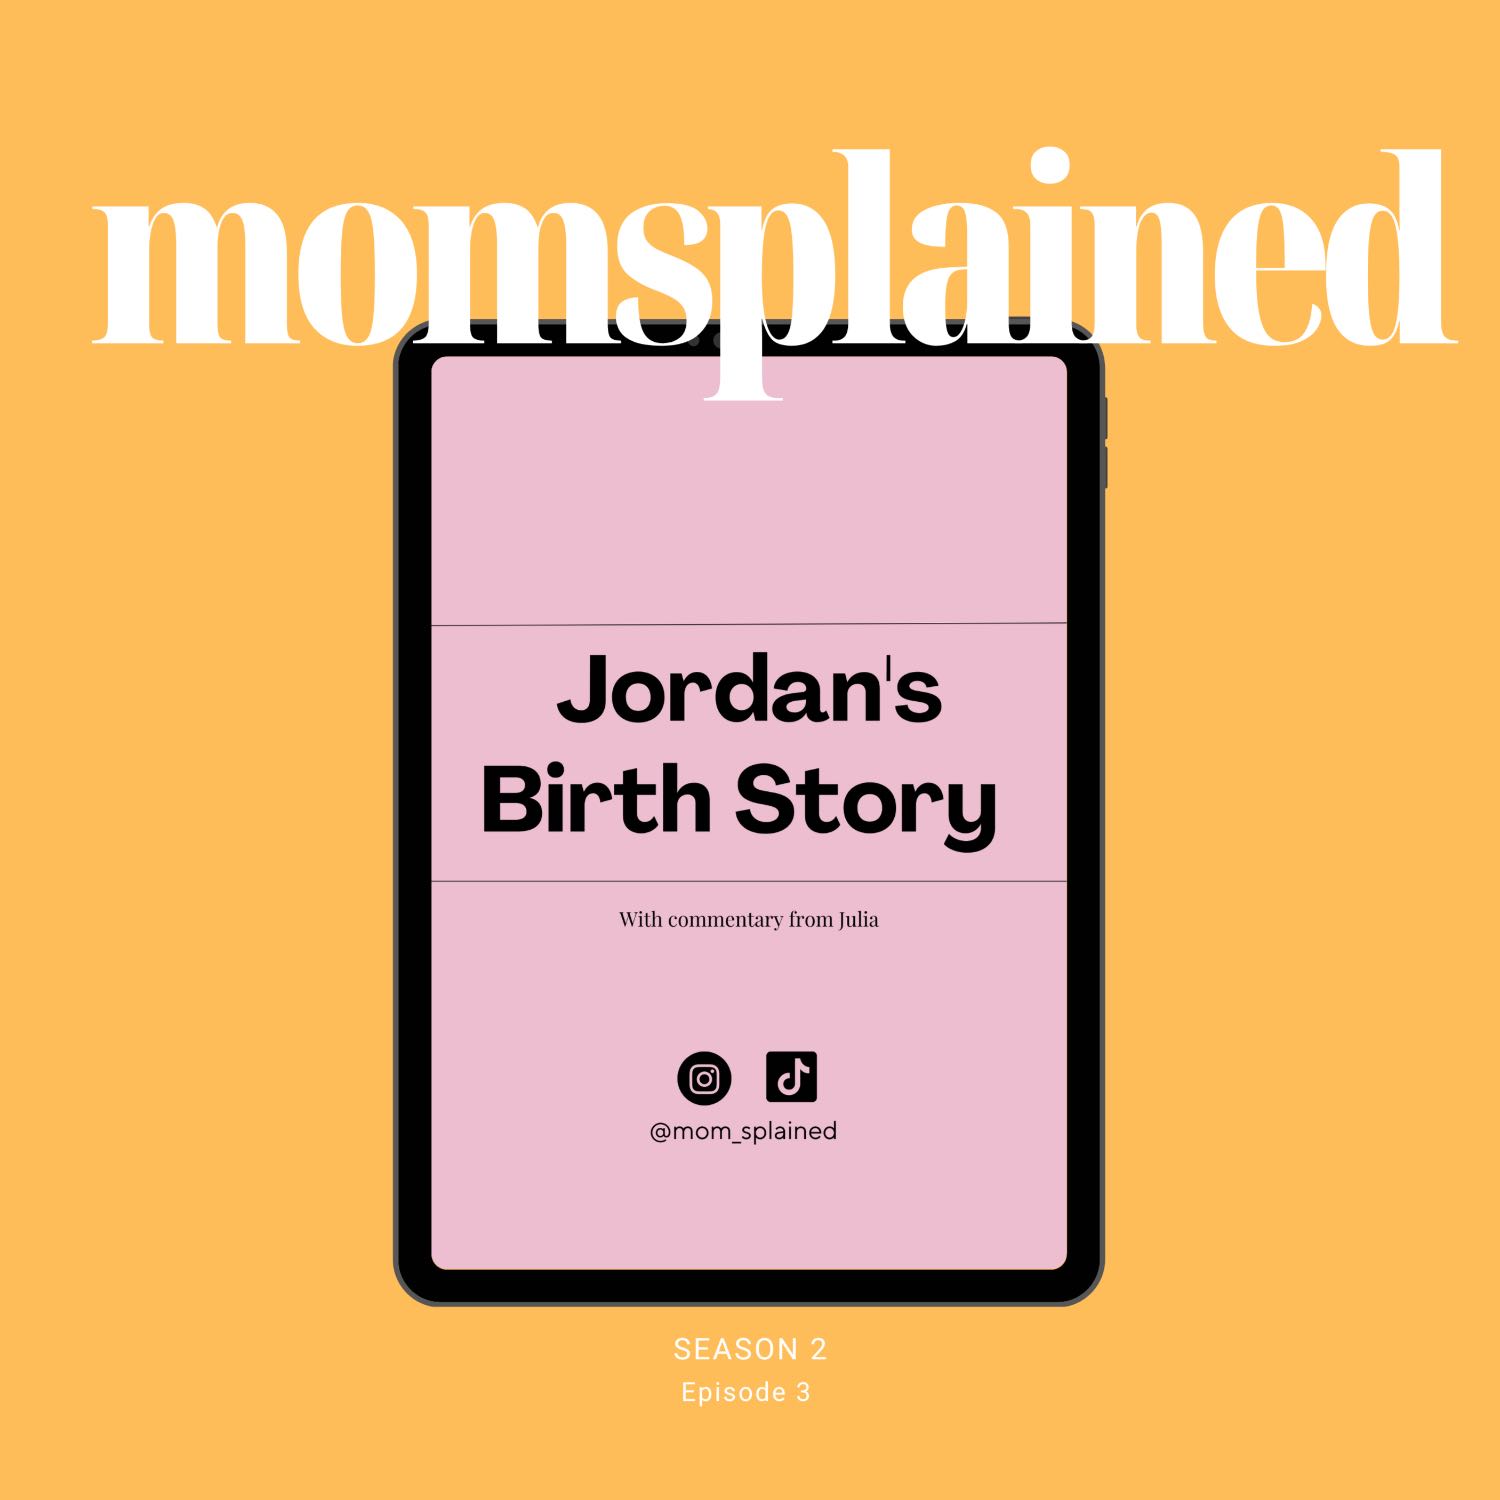 Jordans Birth Story (with commentary from Julia)